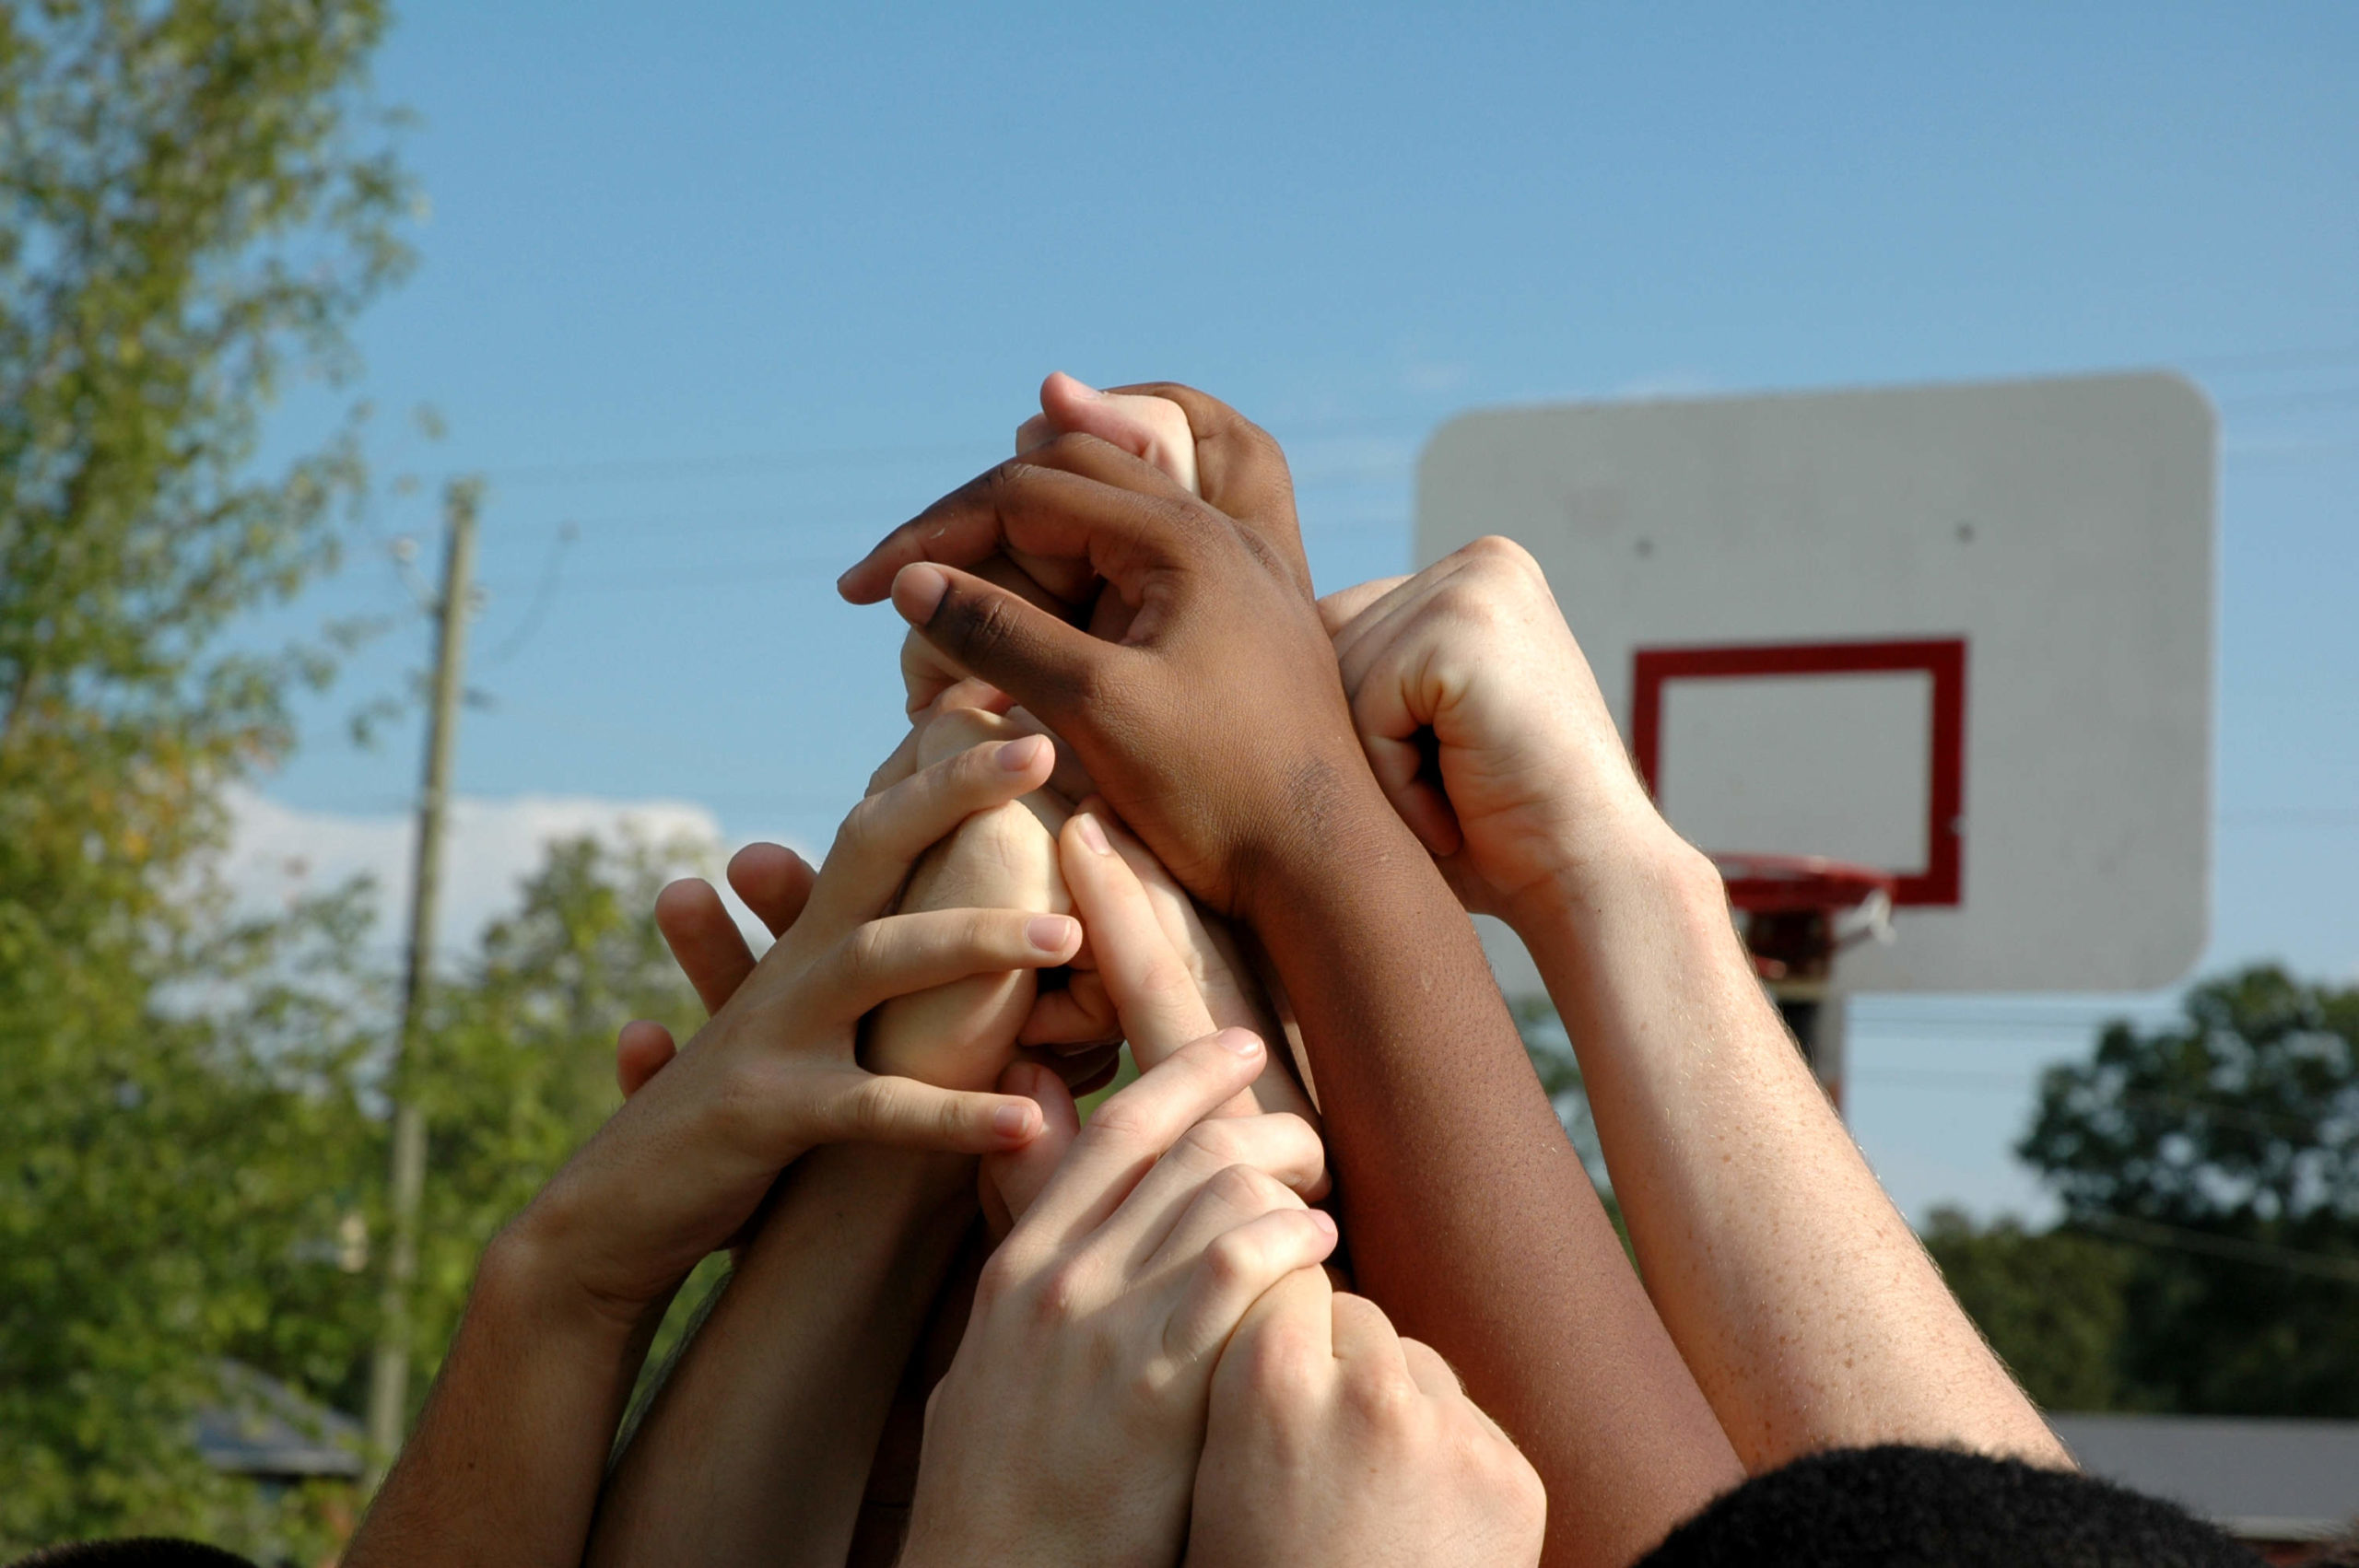 Close-up of several children extending their arms into the air to form a pyramid. In the background are trees, power lines and a basketball hoop.